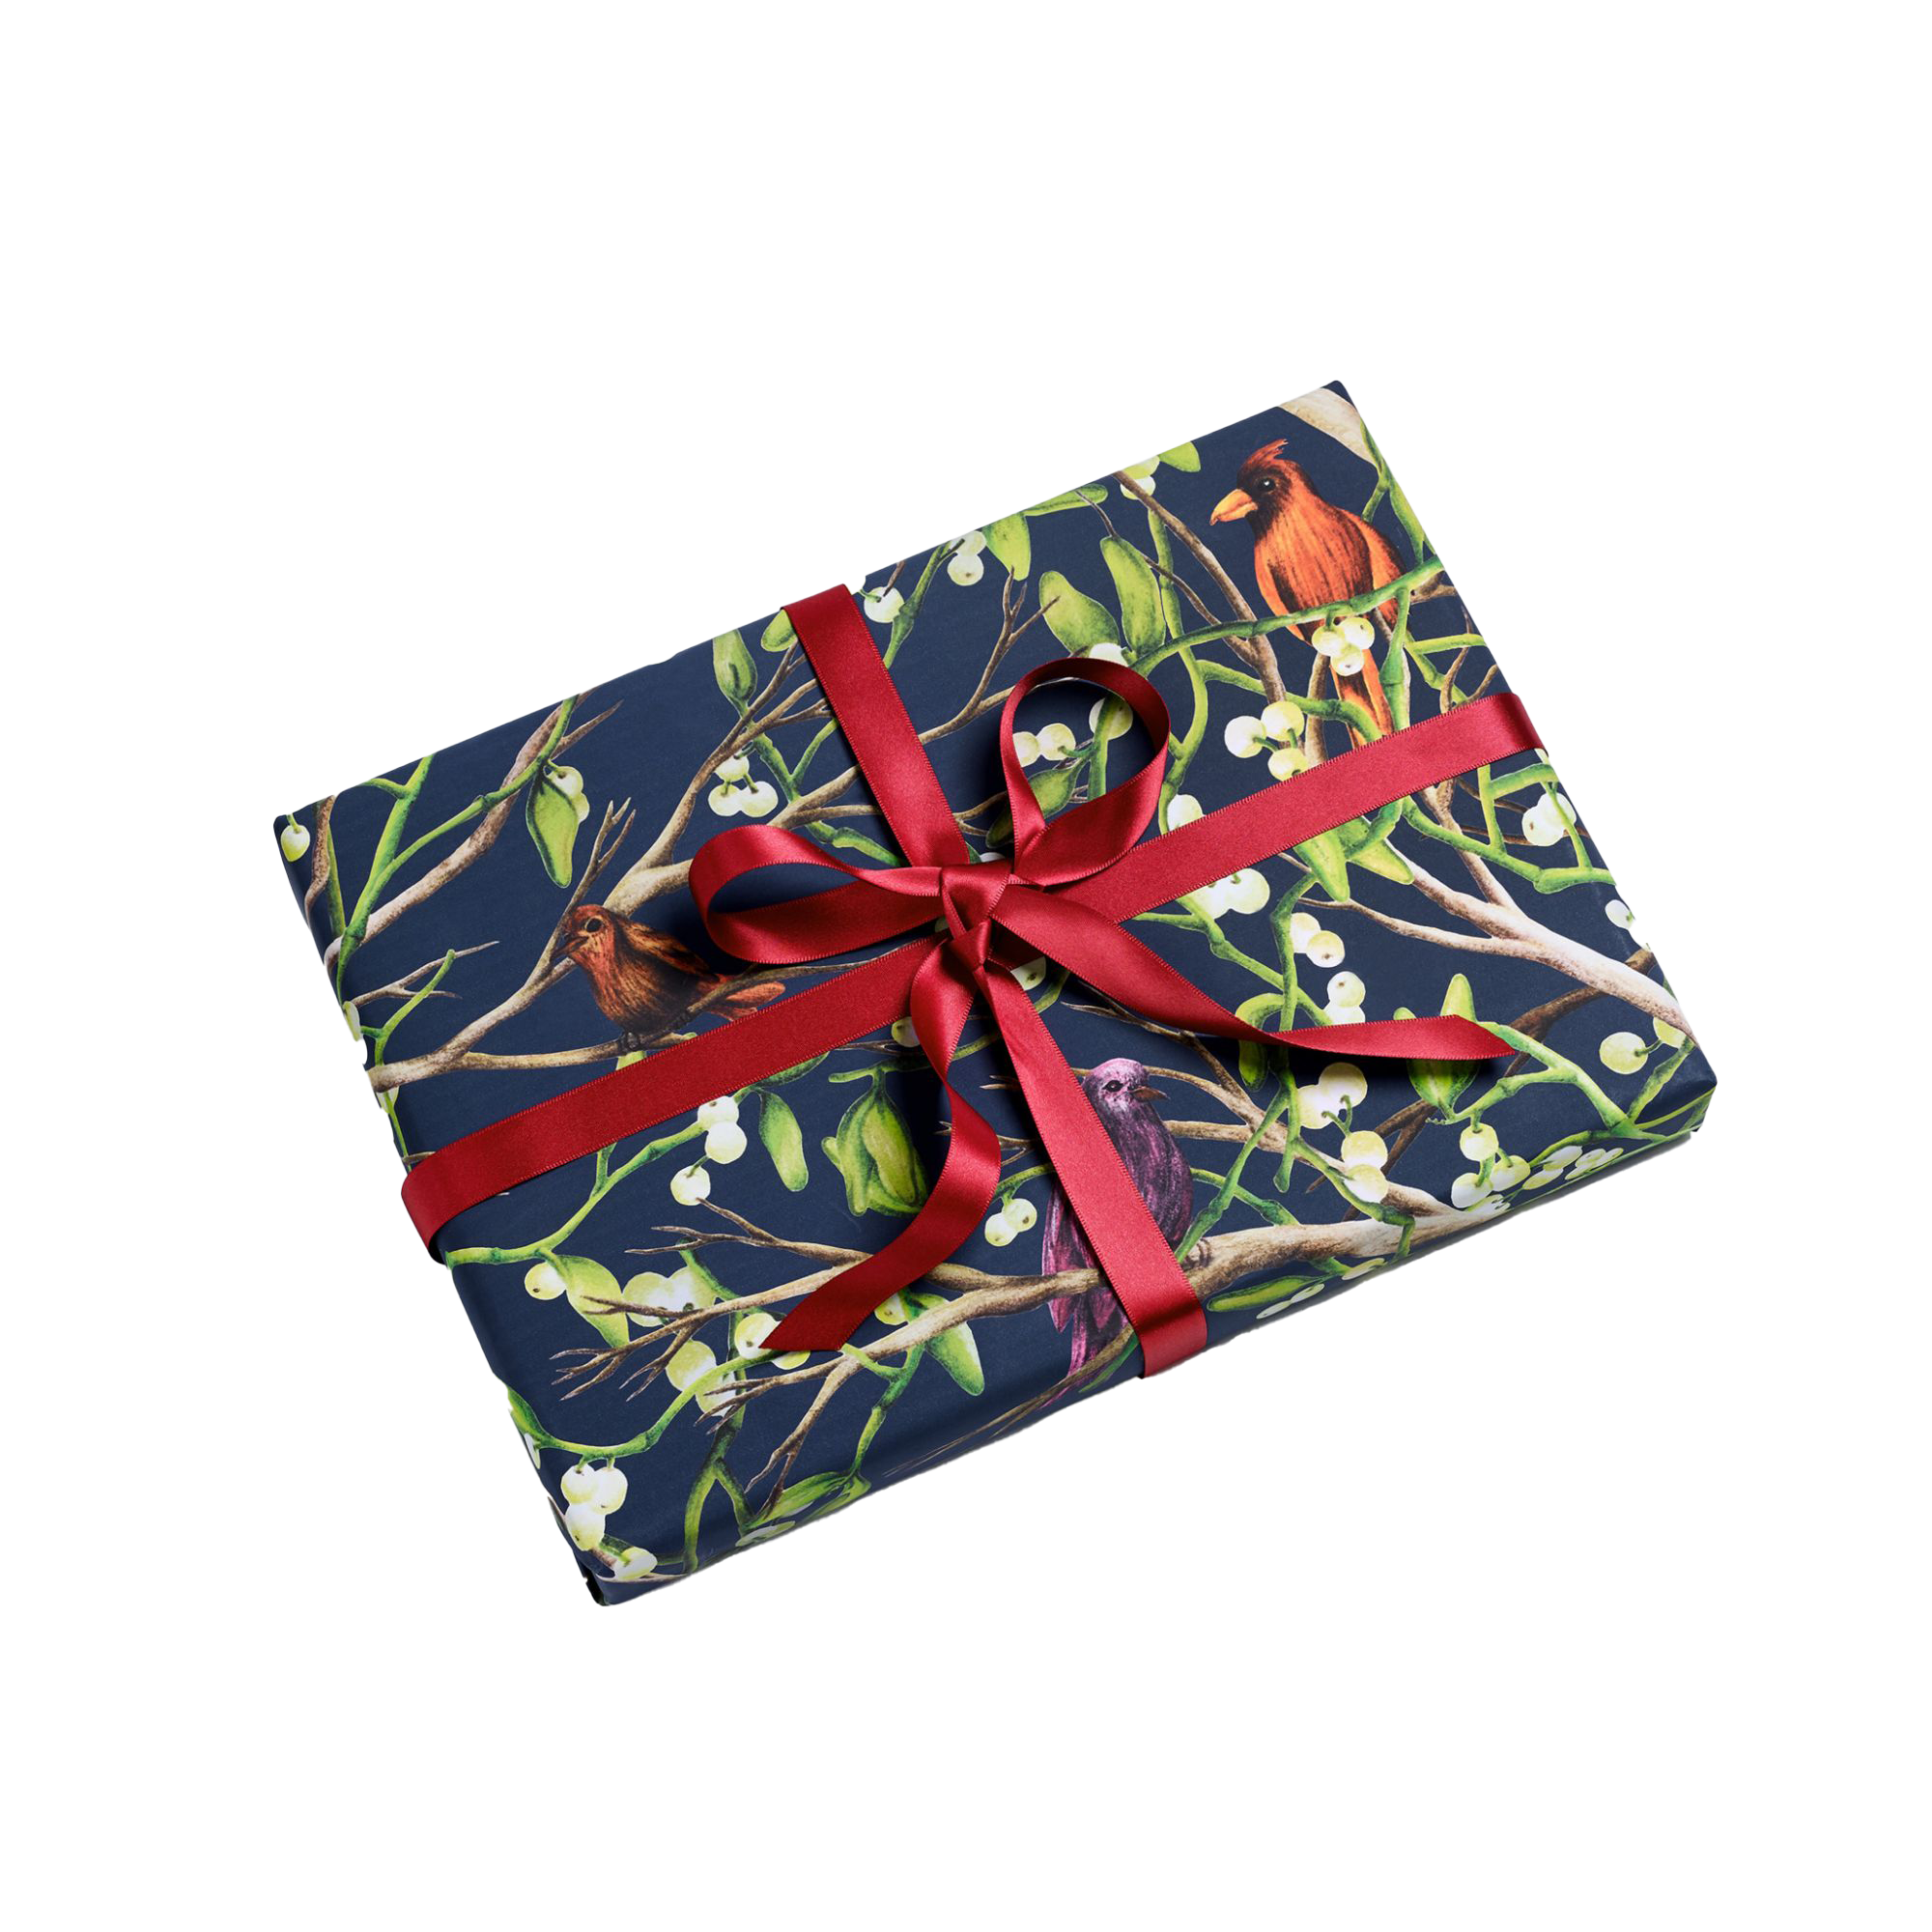 Wrapped Christmas Gift PNG Image Background